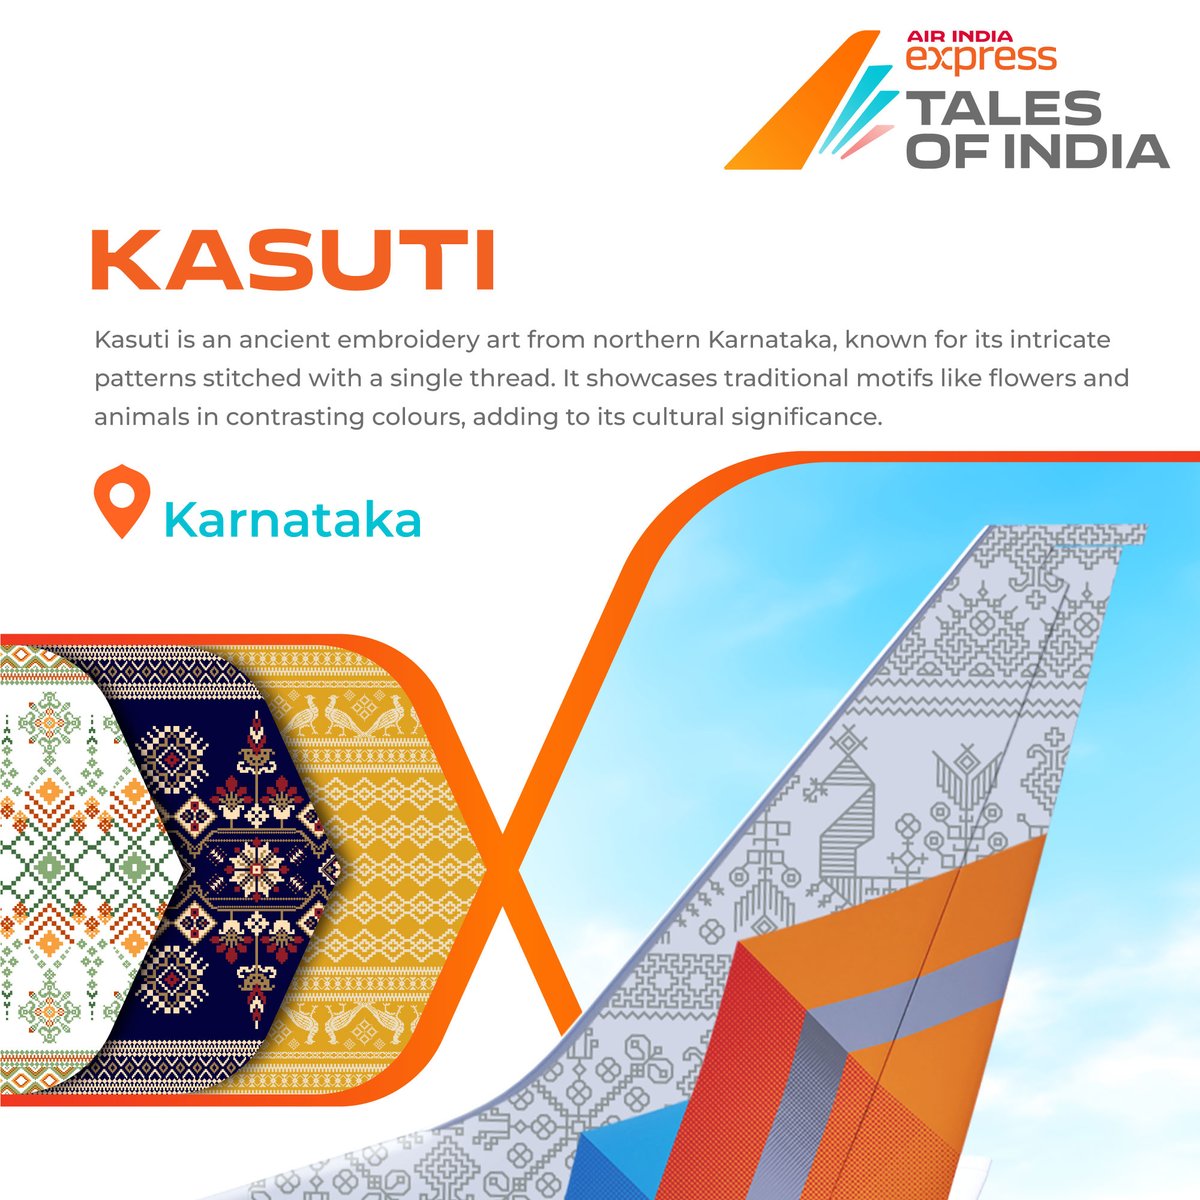 Delve into the timeless elegance of India's cultural heritage with #TalesOfIndia! Proudly displayed on the tail of our very own VT-BXO is the exquisite Kasuti embroidery, with its origins in northern Karnataka. Renowned for its intricacy and finesse, Kasuti patterns are